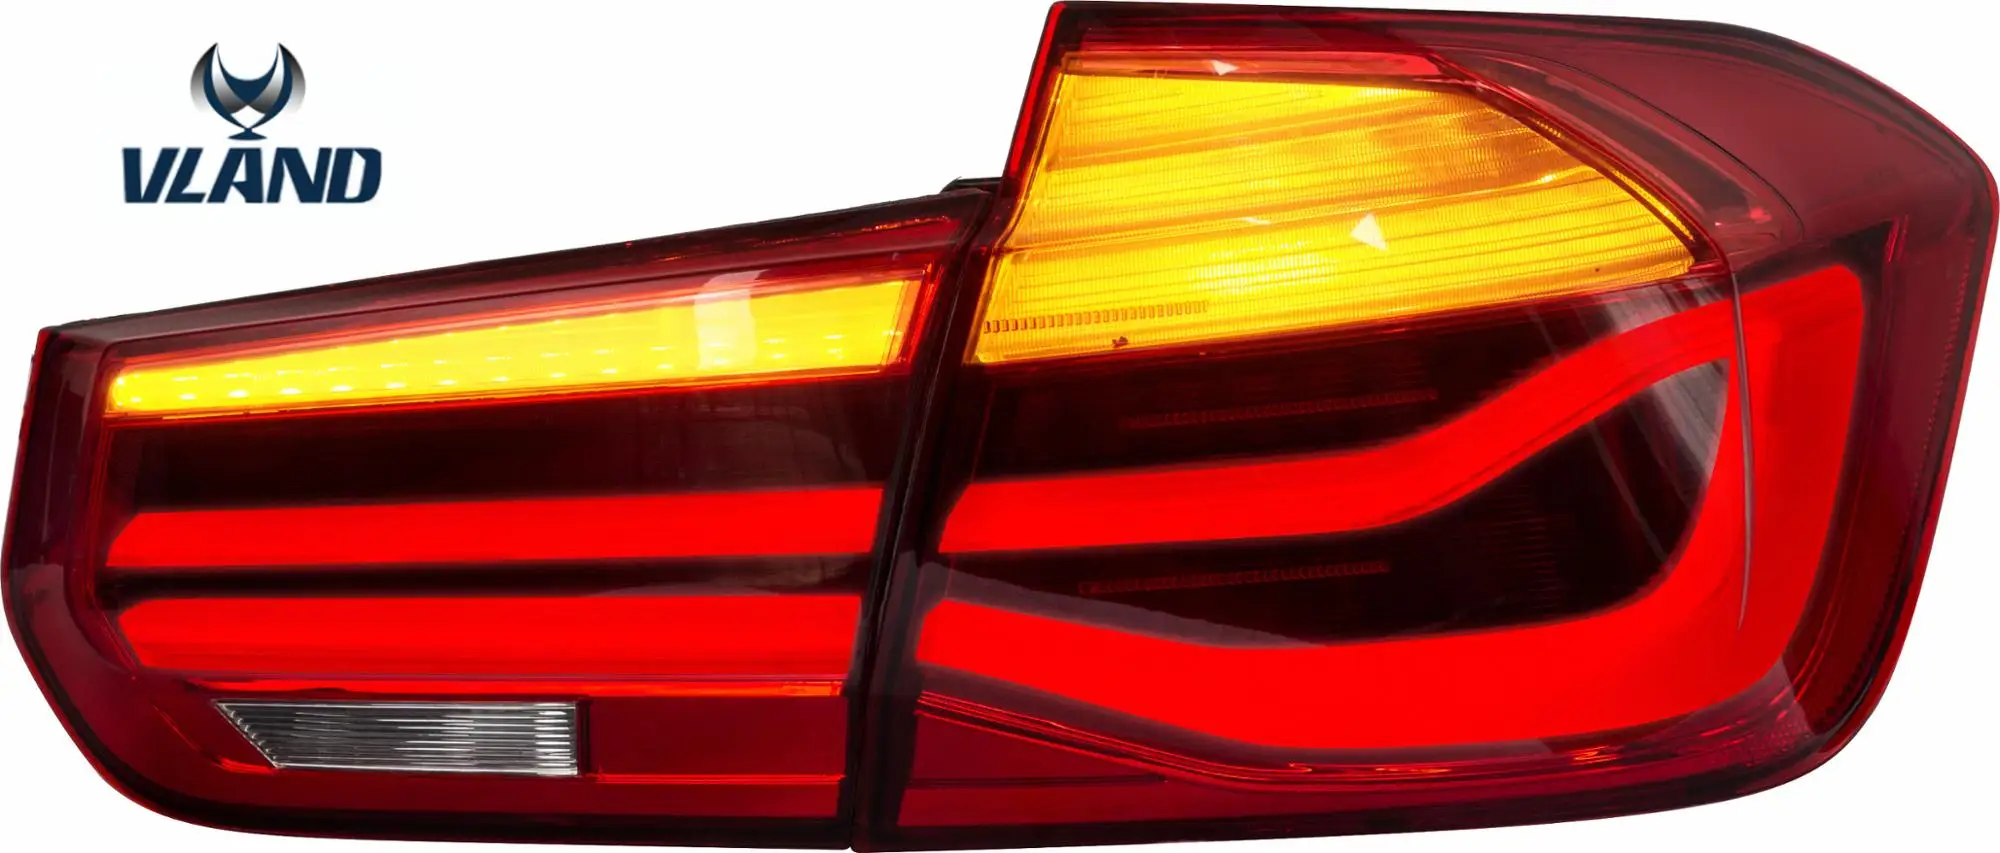 VLAND factory for Car Tail lamp for F30 LED Taillight 2013-2015 for F35 tail light with moving turn signal full LED rear lamp